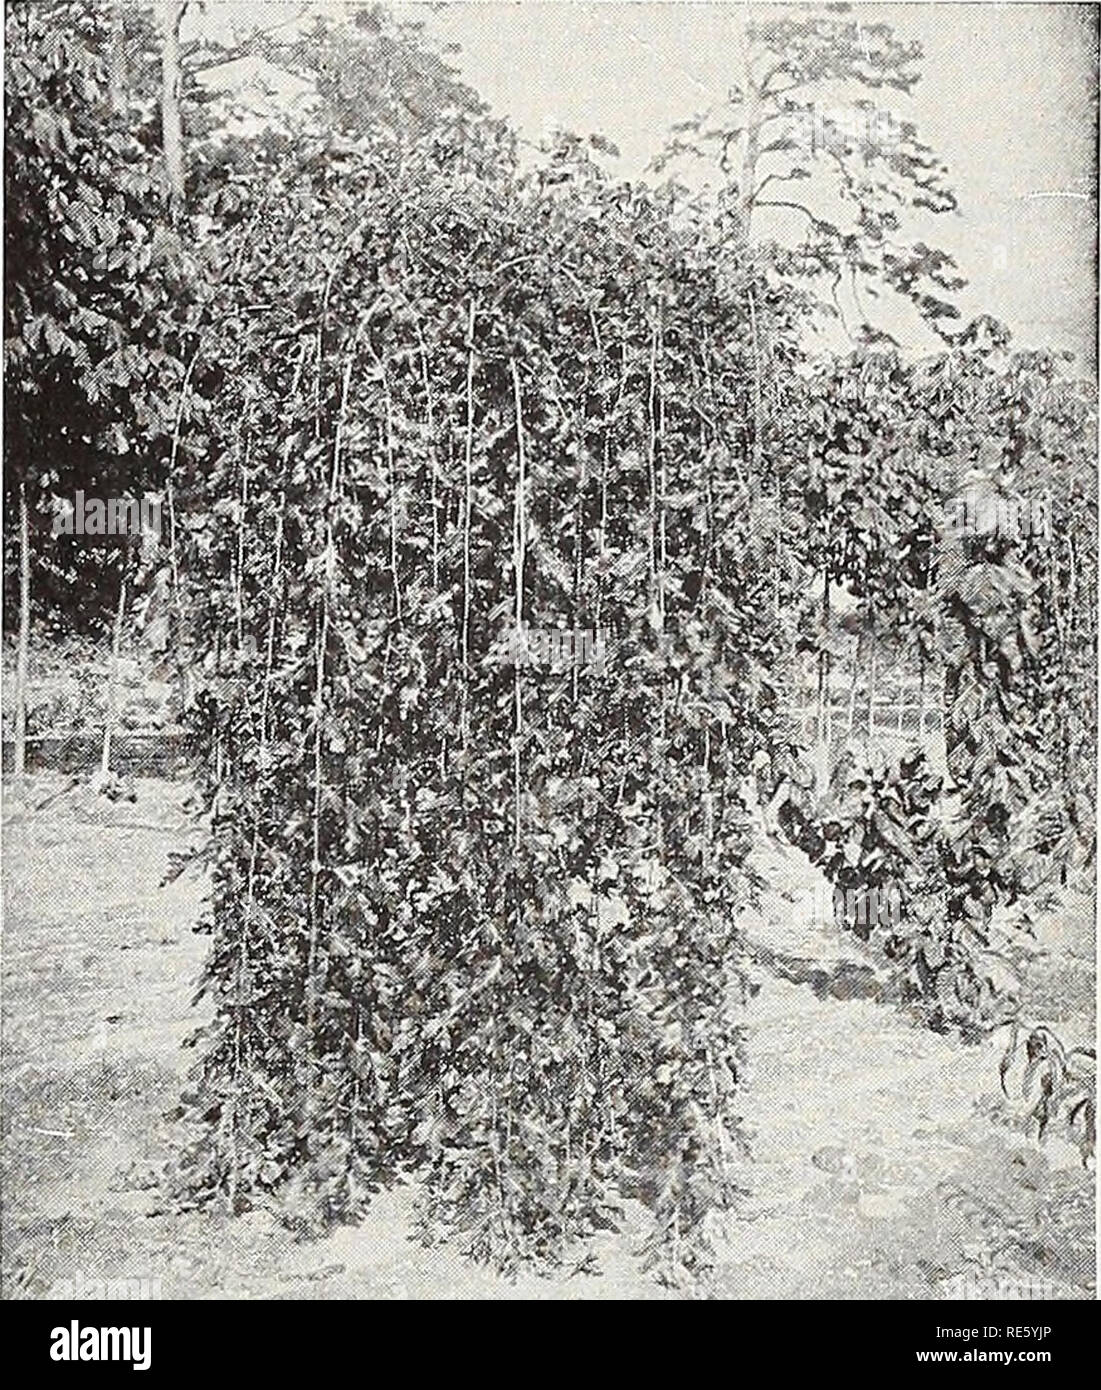 . Creations by Fruitland Nurseries : the South's favorite established in August - Georgia 1856. Nurseries (Horticulture) Catalogs; Nurseries (Horticulture) Georgia; Flowers Catalogs; Trees Catalogs; Fruit Catalogs. Fruitland Nurseries The South's Oldest Nursery Augusta, Ga. 13 POPULUS—Poplar Populus nigra italica (Lombardy Poplar). 40 to 50 ft. The well-known Italian variety. A tall, pyramidal, compact and rapid-growing tree, extensively planted in the southern part of Europe. Very desirable where a formal effect is wanted. P. simoni fastigiata (Simon Poplar). 40 to 50 ft. A remarkable variety Stock Photo